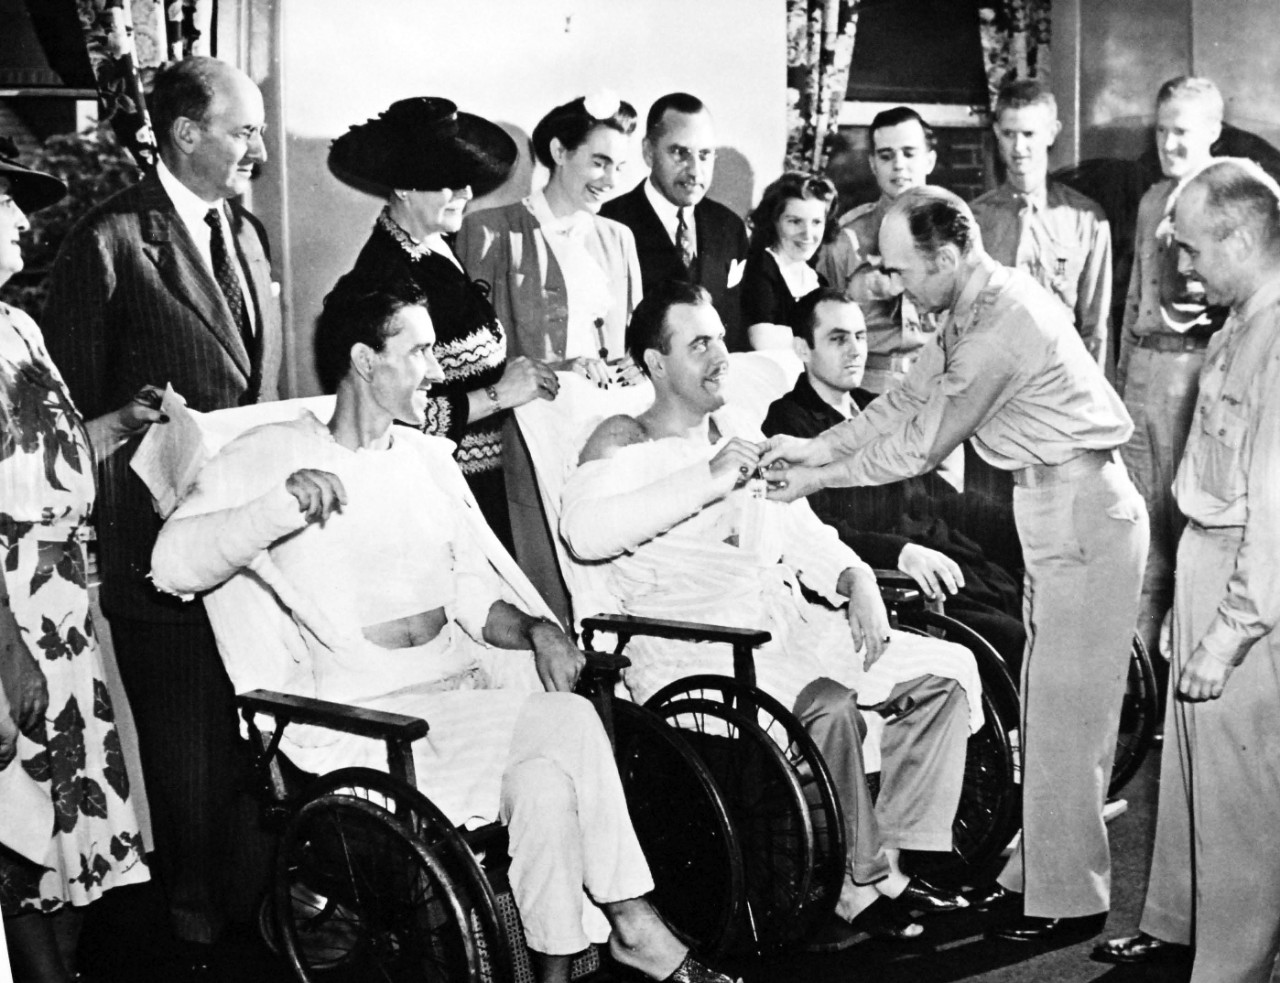 111-SC-21321AC:   Doolittle Raid on Japan, April 18, 1942.   Courage and wounds are honored at Walter Reed Hospital, Washington, D.C., in the first such ceremony conducted at the Army Medical Center during the war.  Shown:  Major General Millard F. Harmon, Chief of Air Staff of the AAF pinning the Distinguished Flying Cross on one of the members of the group which flew with Major General Doolittle in the raid over Japan.  Former Secretary of the Treasury, Henry Morgenthau, second from left, back row.  Major General Doolittle at right of front row.  U.S. Army Photograph, now in the collections of the National Archives.  (2017/05/02).